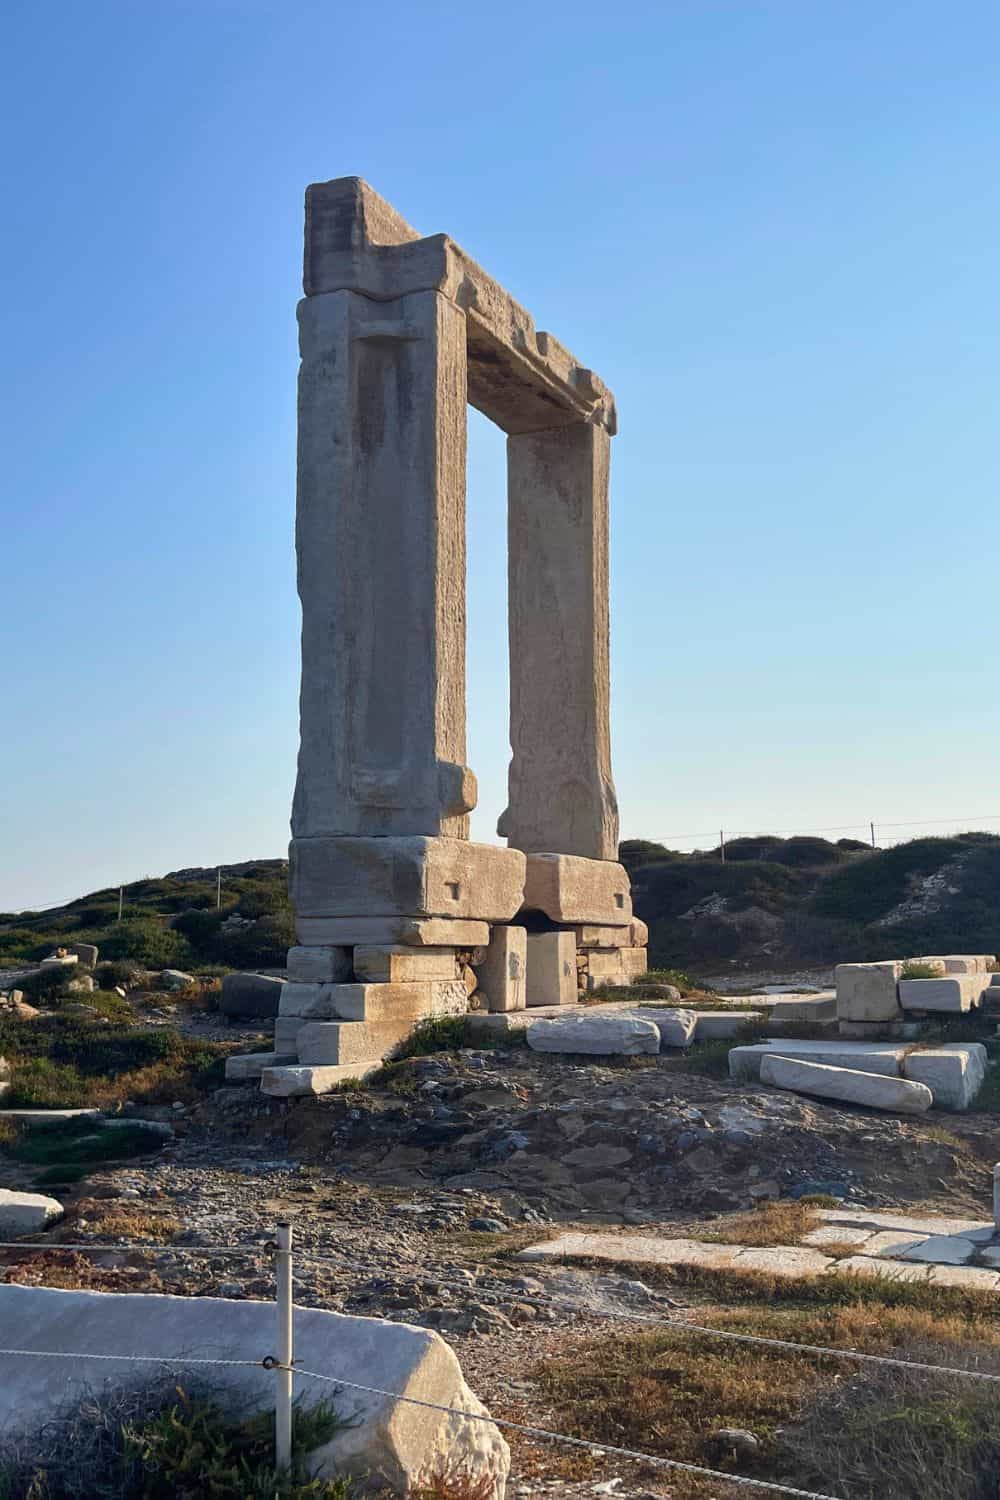 The Portara, a large marble doorway standing on a hill, remnants of an ancient temple on the island of Naxos, with clear blue sky in the background, and the sunlight casting a warm glow on the stone